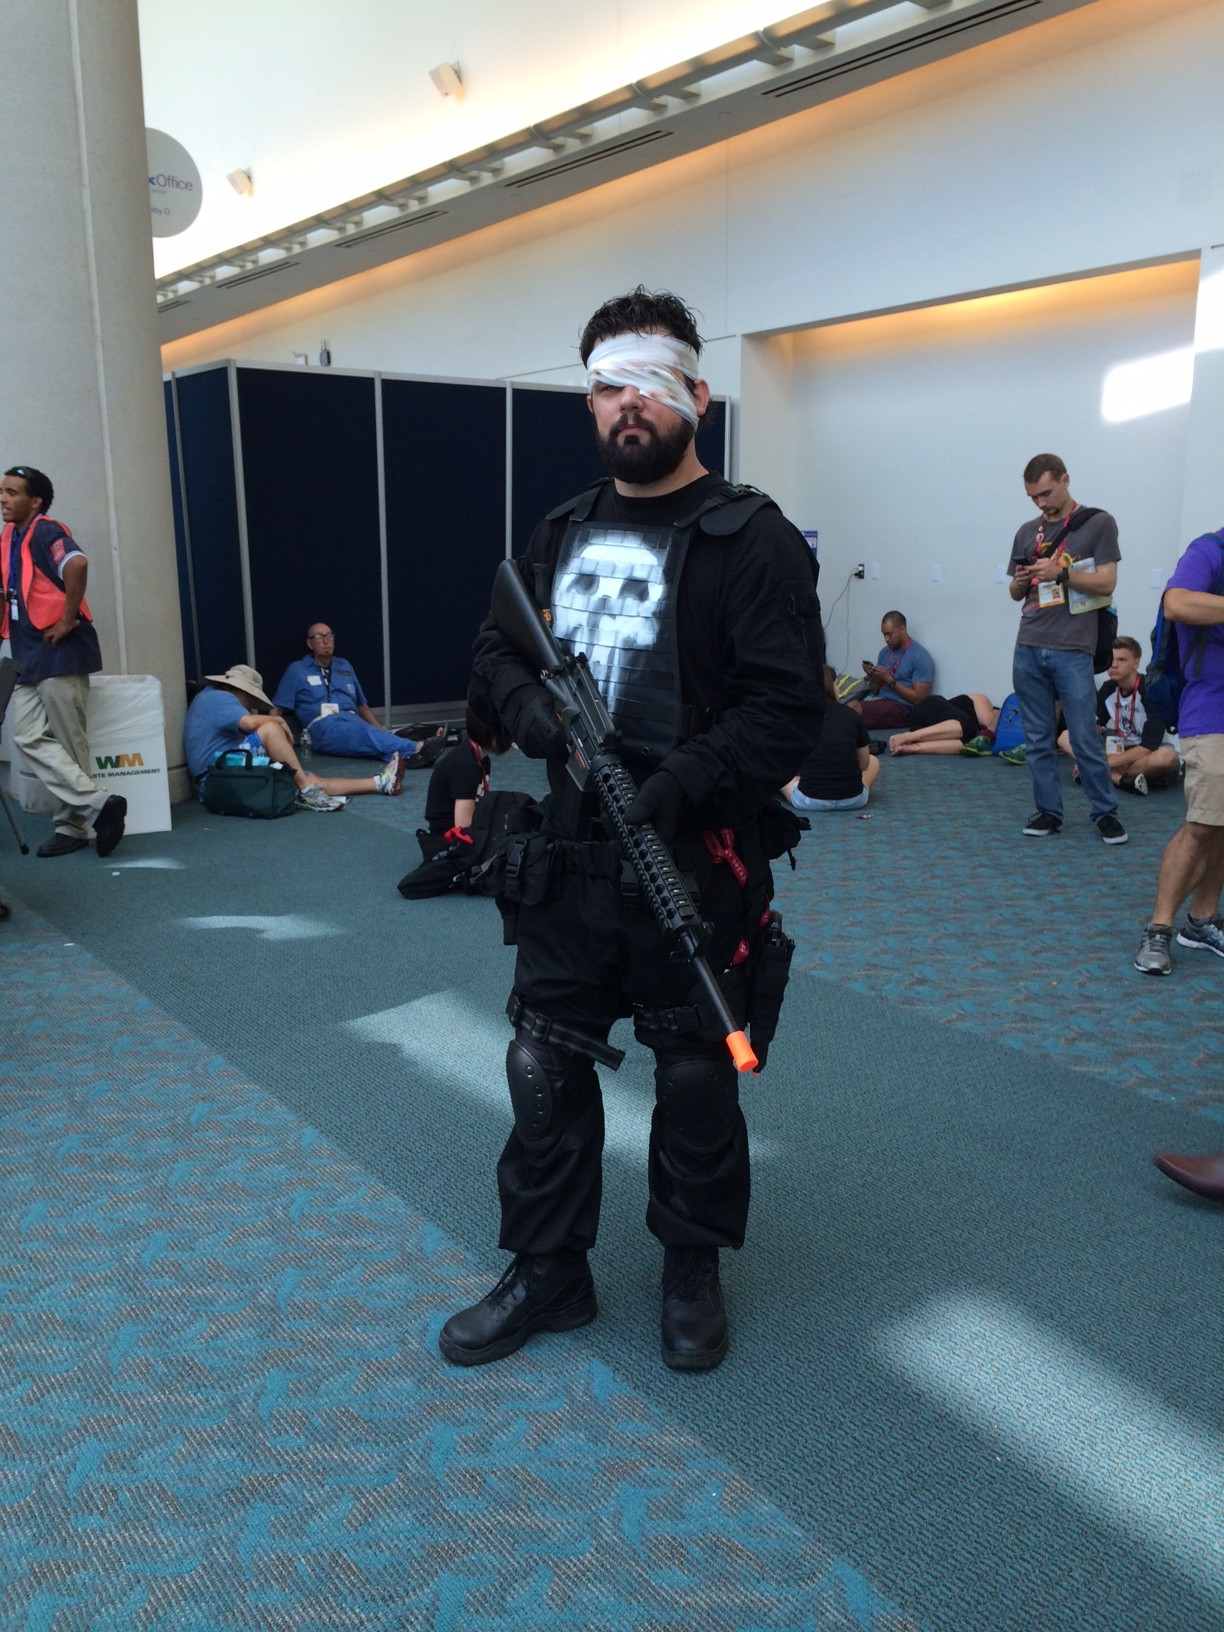 San Diego Comic Con 2014 – Thursday, 24th July Cosplay (Day 1)